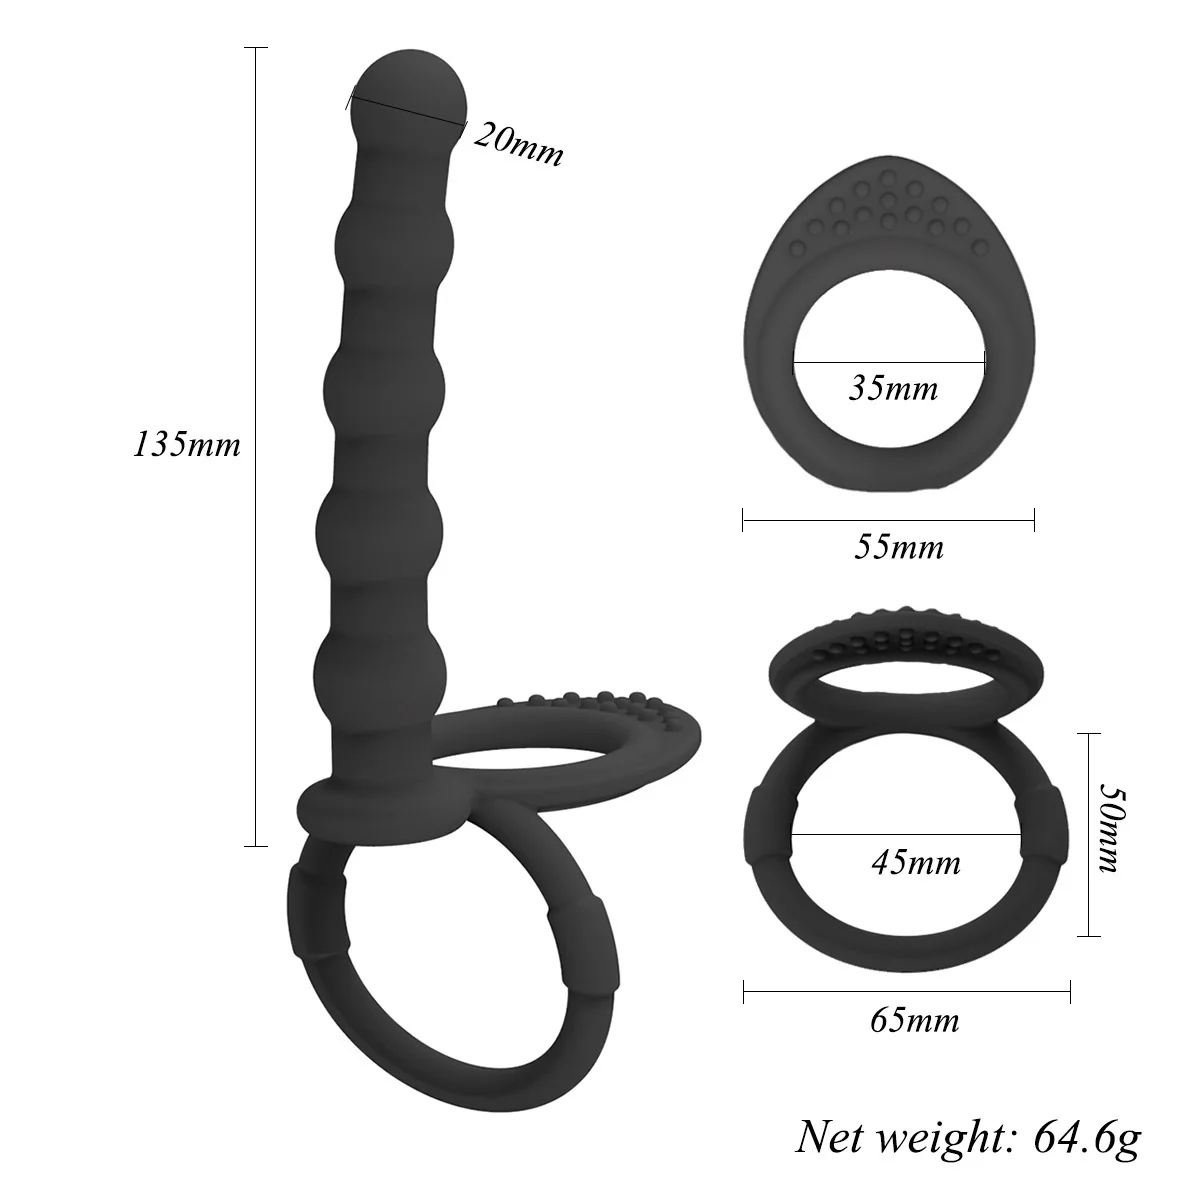 

Men and Women Share Pull Beads Lock Essence Ring Silicone Anal Plug Stimulation Double Bound Penis Ring Adult Sex Products